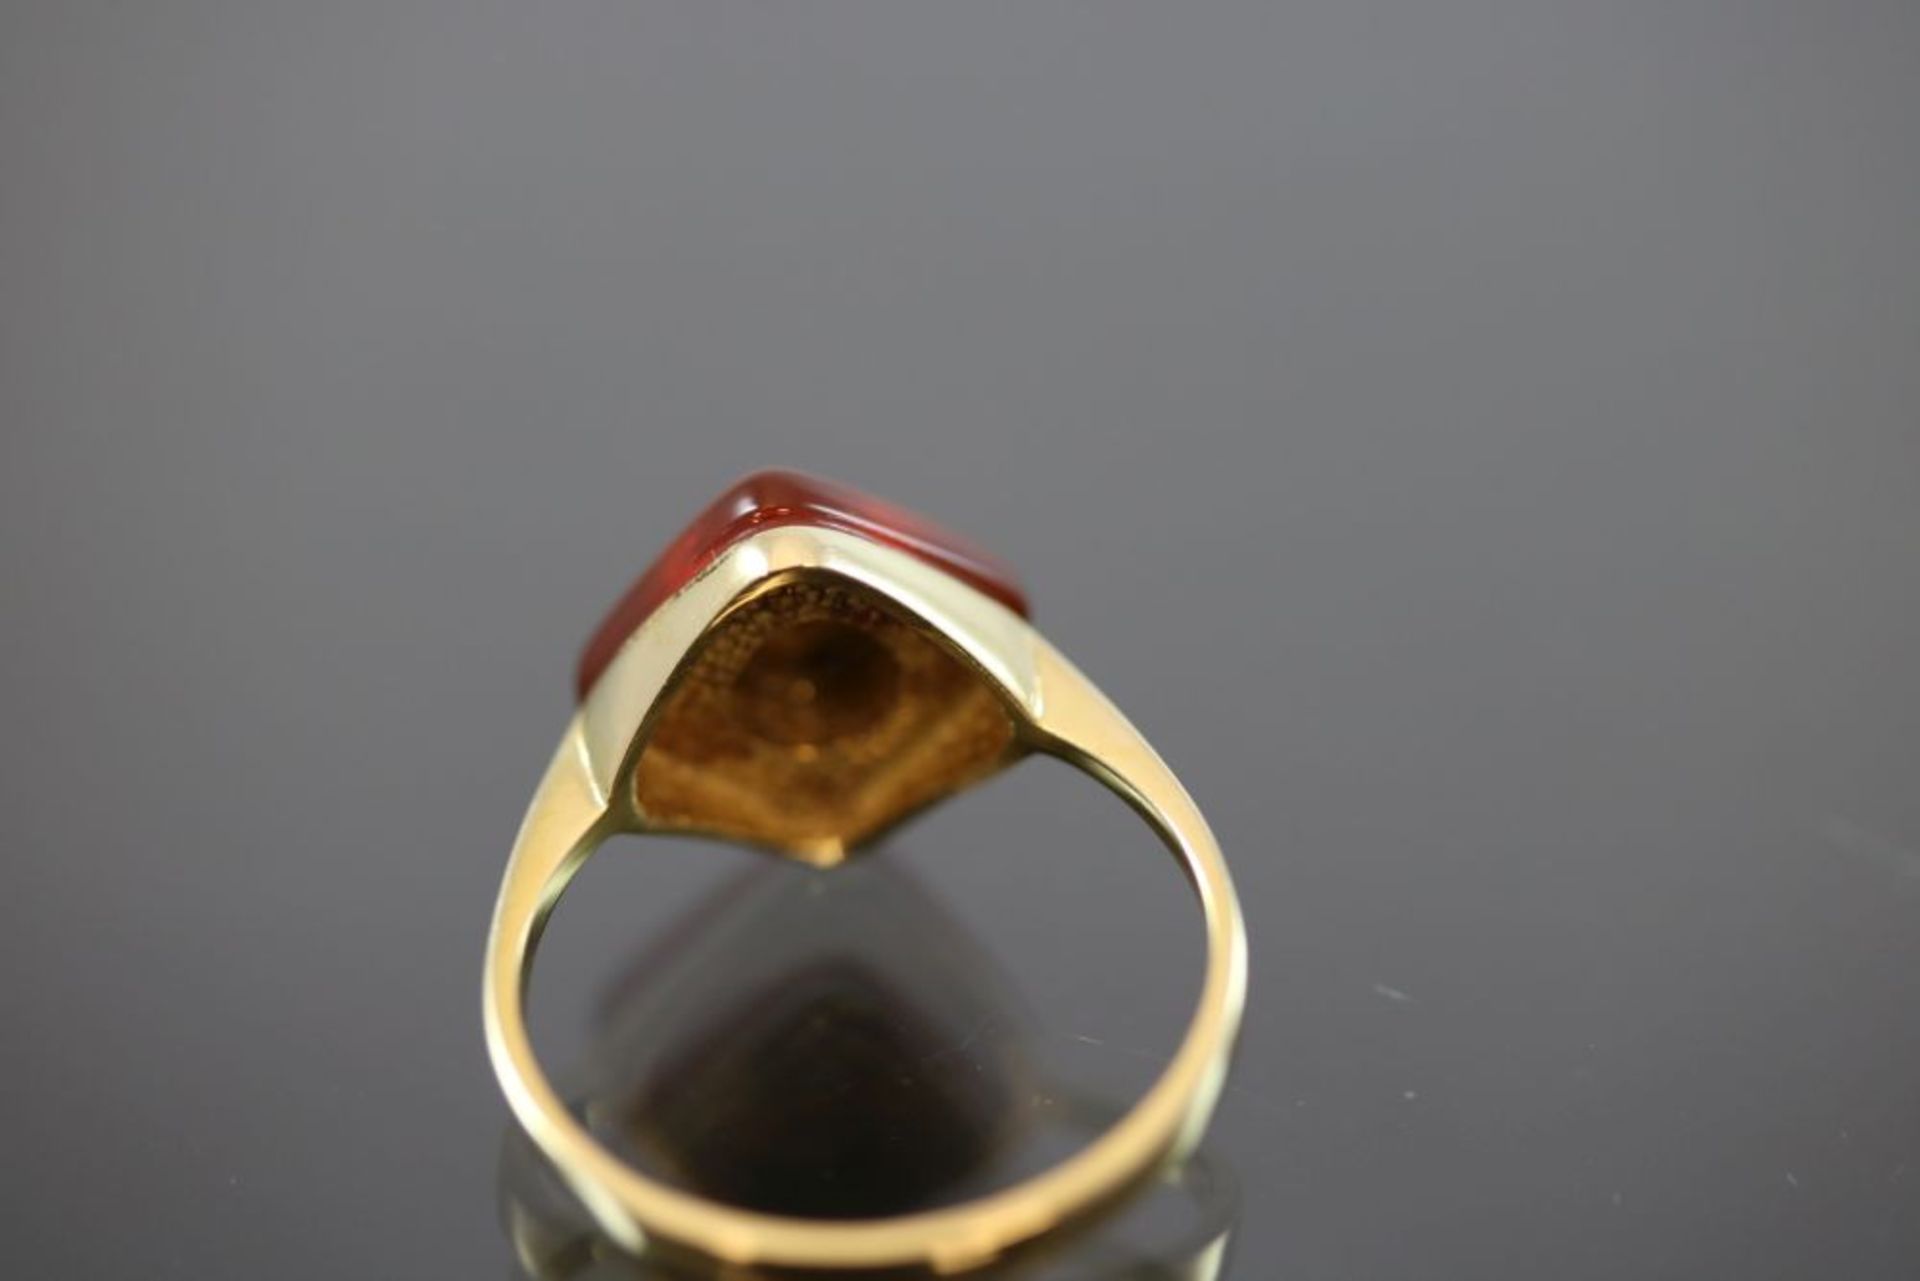 Diamant-Ring, 585 Gold - Image 3 of 3